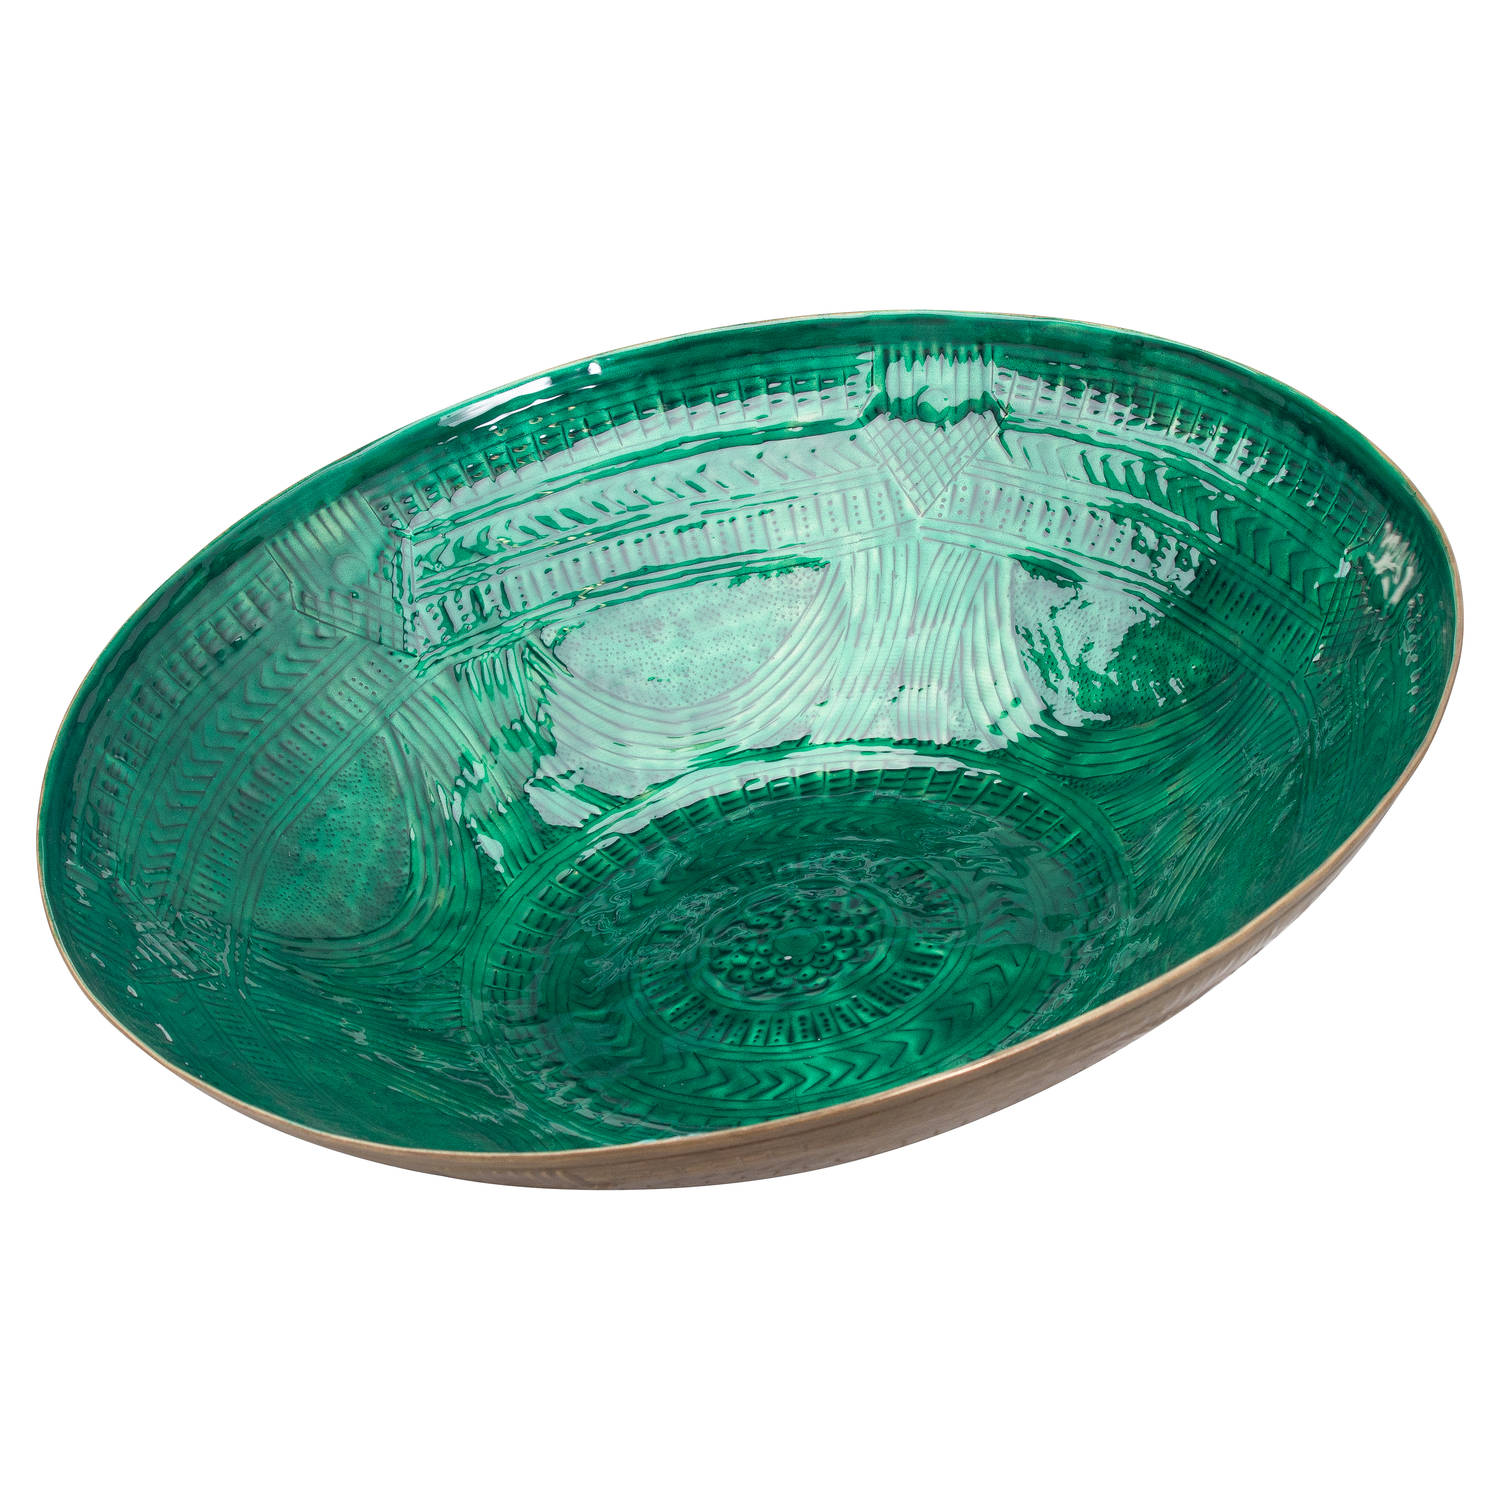 Aztec Collection Brass Embossed Ceramic Dipped Bowl - Image 1